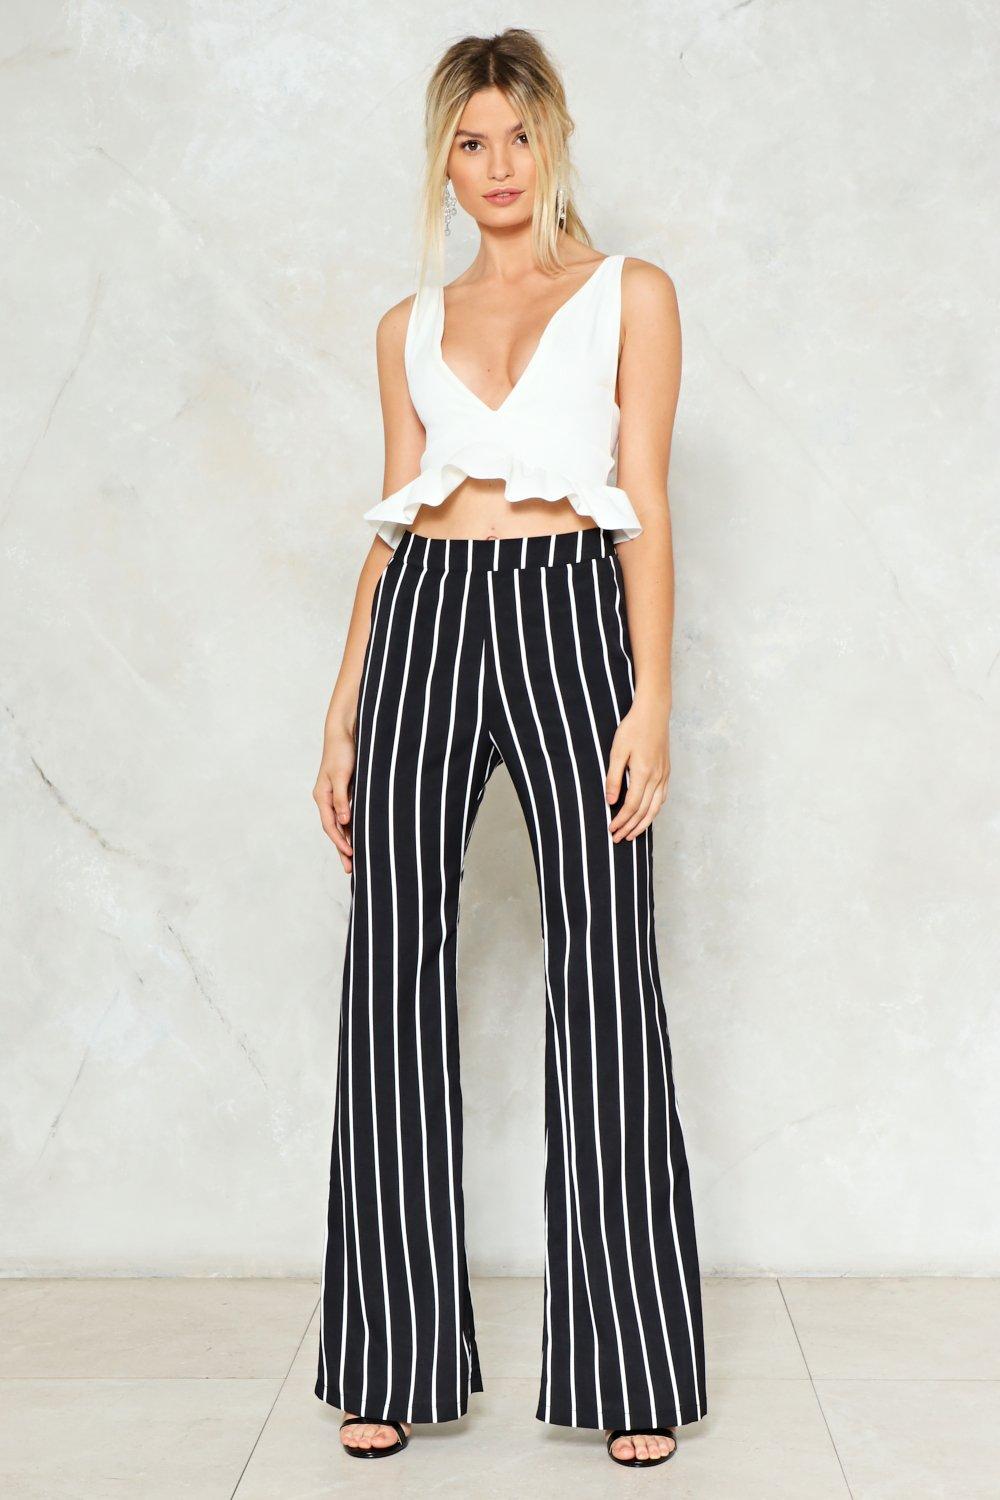 striped pants flare